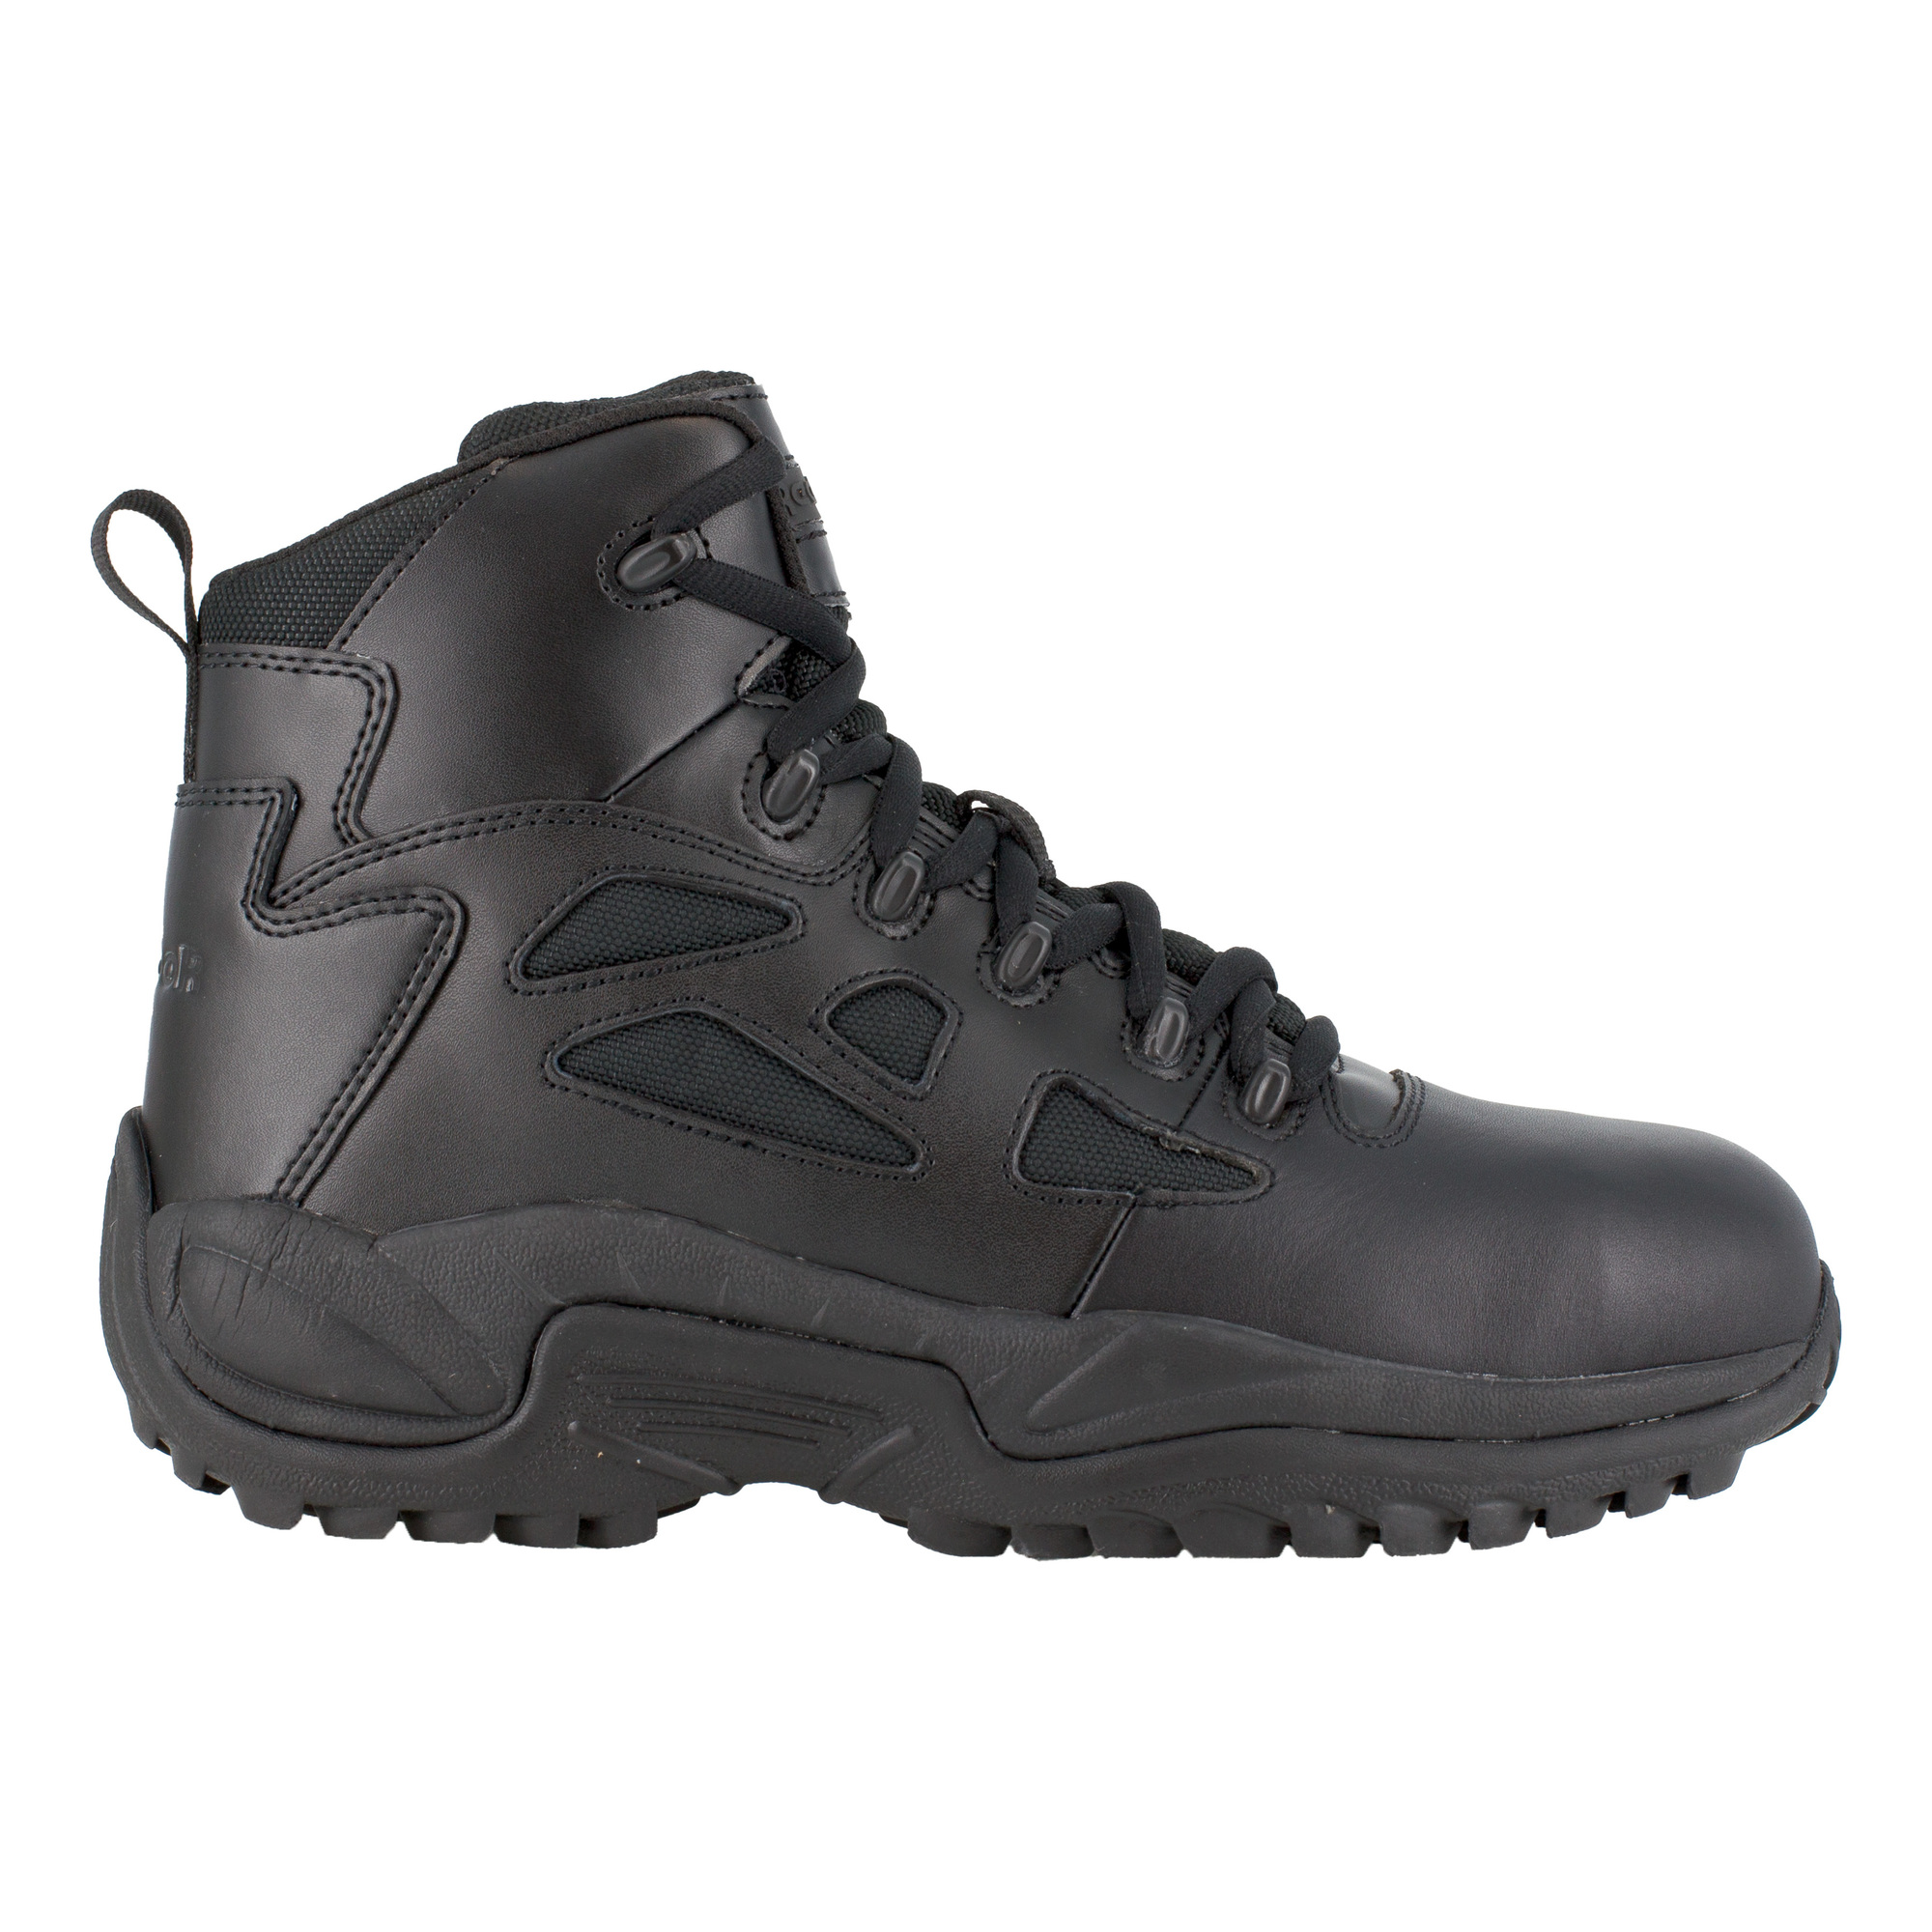 Reebok, 6Inch Tactical Stealth Boot with Side Zipper, Size 12, Width Wide, Color Black, Model RB864